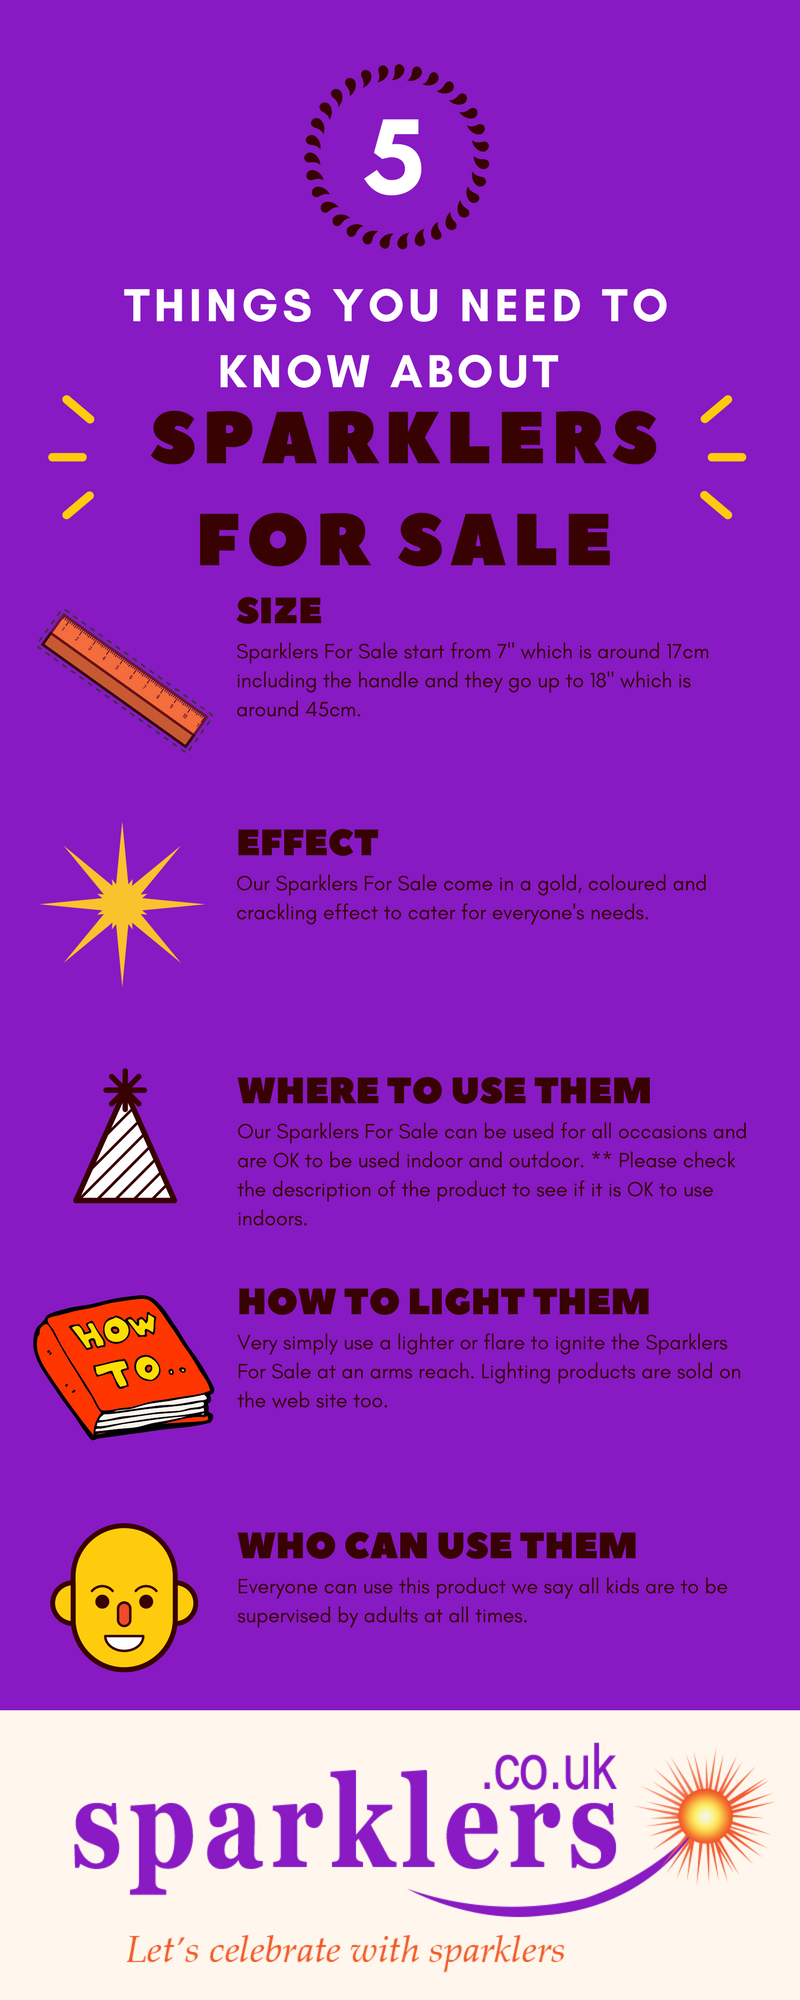 Sparklers-For-Sale-info-graphic